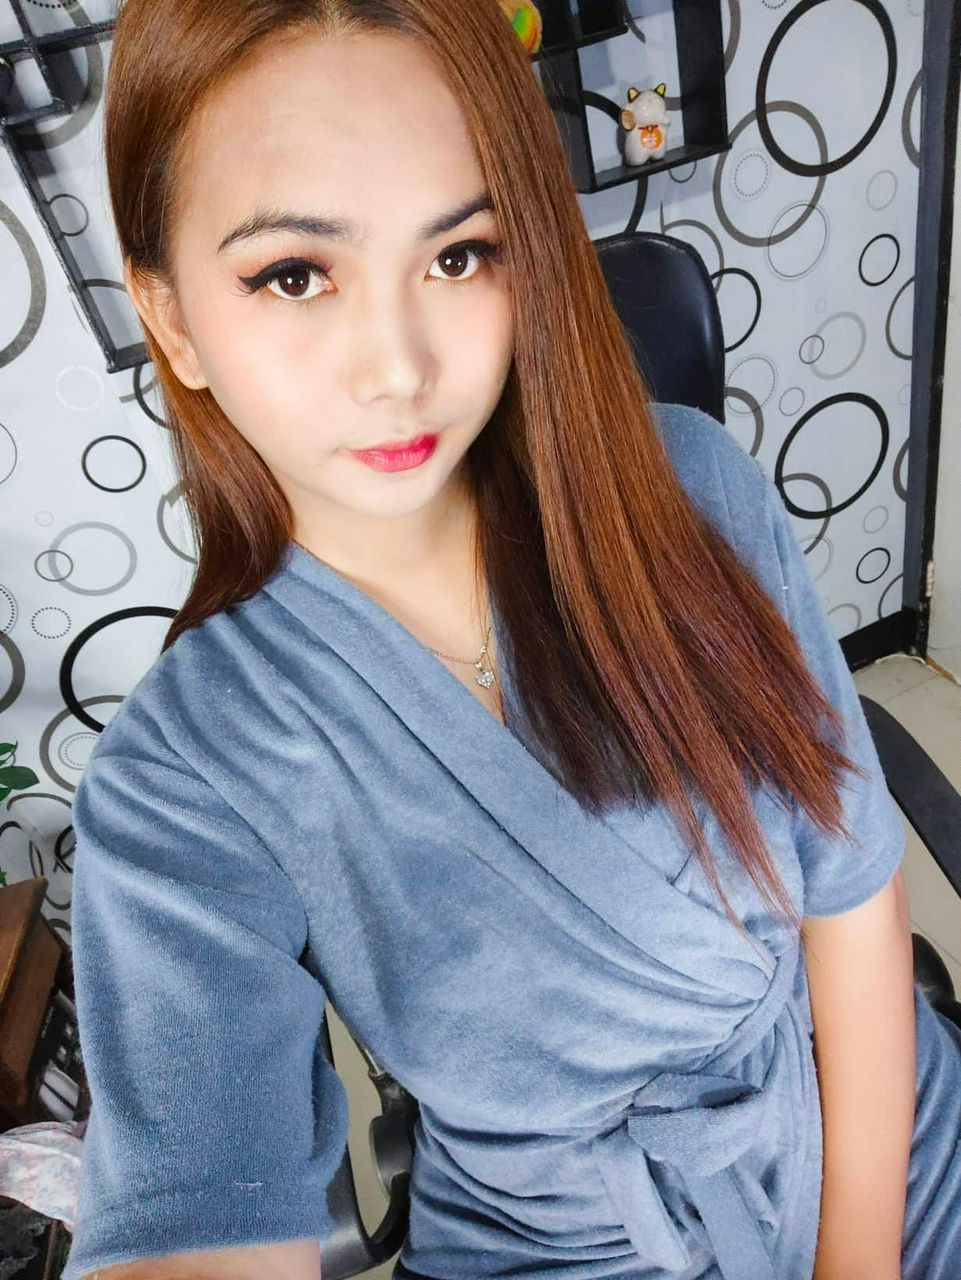 Escorts Makati City, Philippines Meet and cam show avail